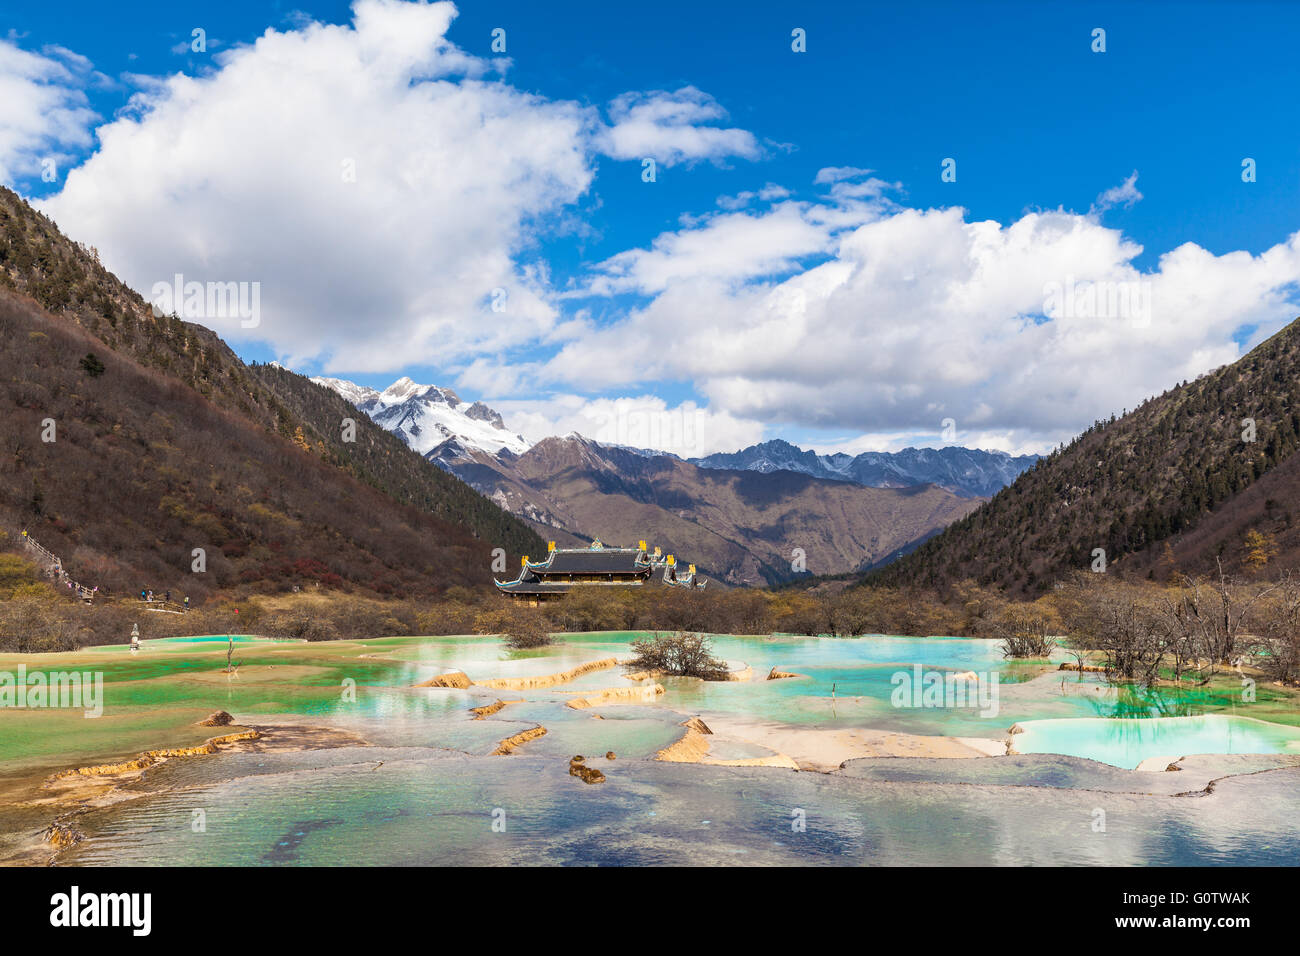 Beautiful scenery in the Huanglong national park Stock Photo